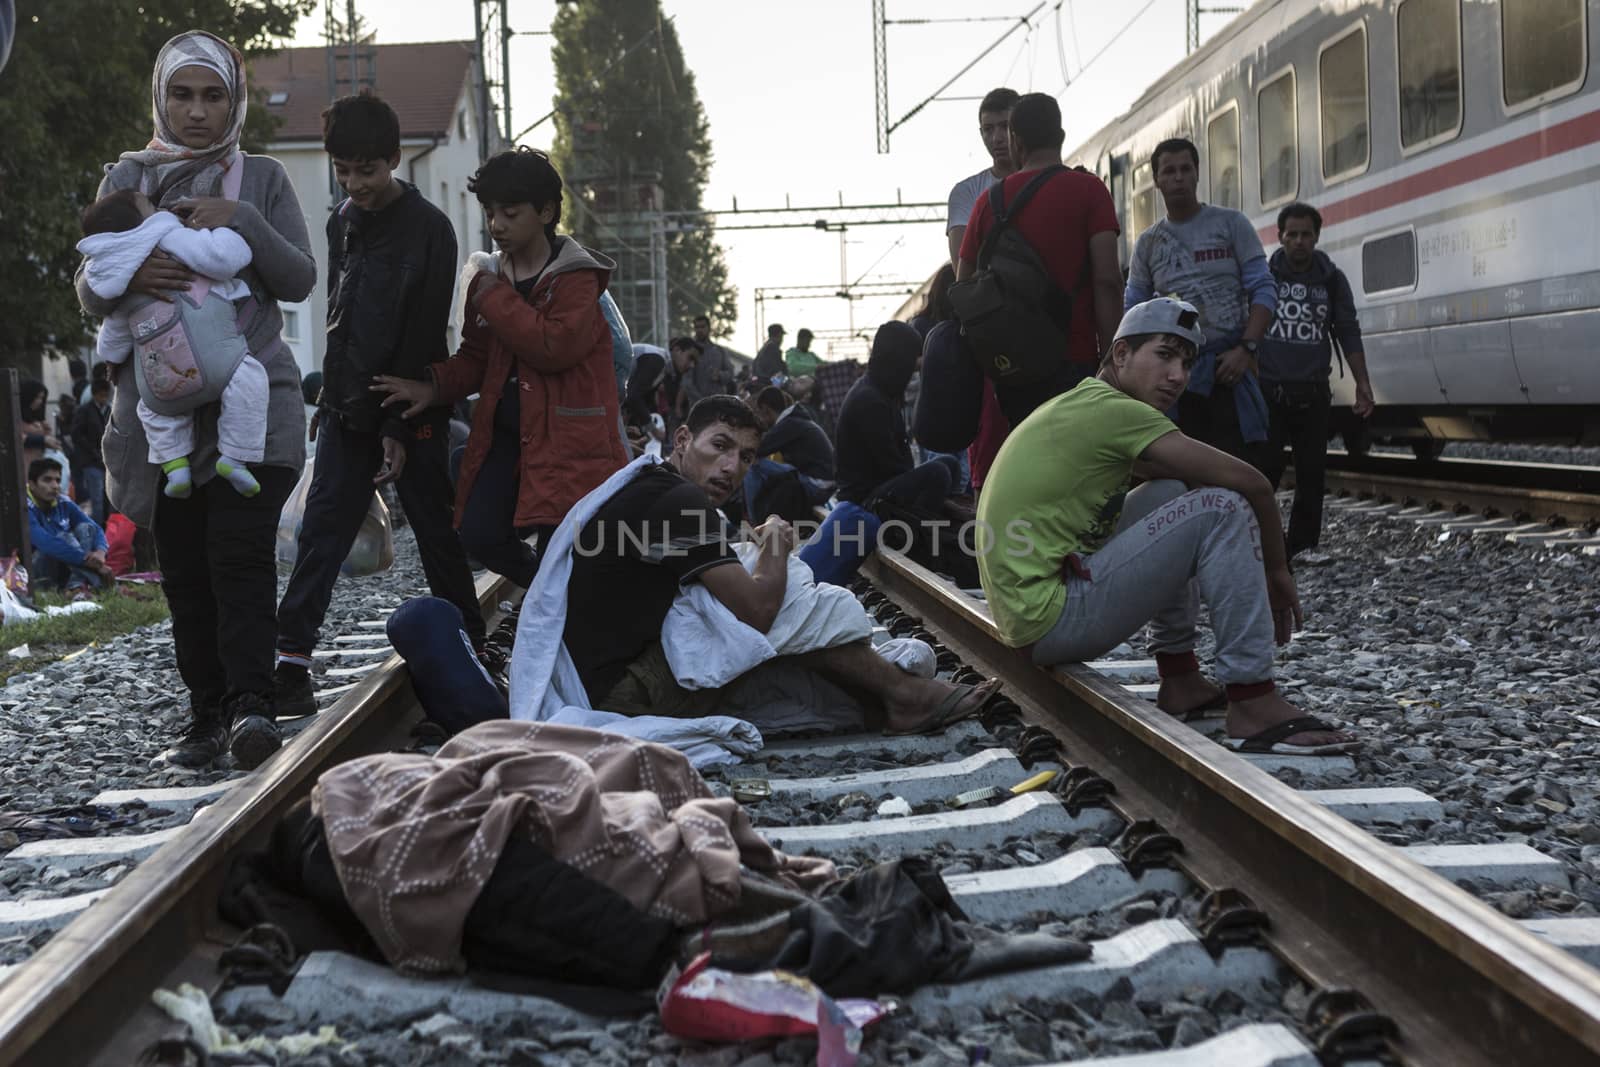 CROATIA, Tovarnik: Refugees sit and wait at the railway station in Tovarnik, Croatia near the Serbian-border on September 18, 2015. Refugees are hoping to continue their journey to Germany and Northern Europe via Slovenia 